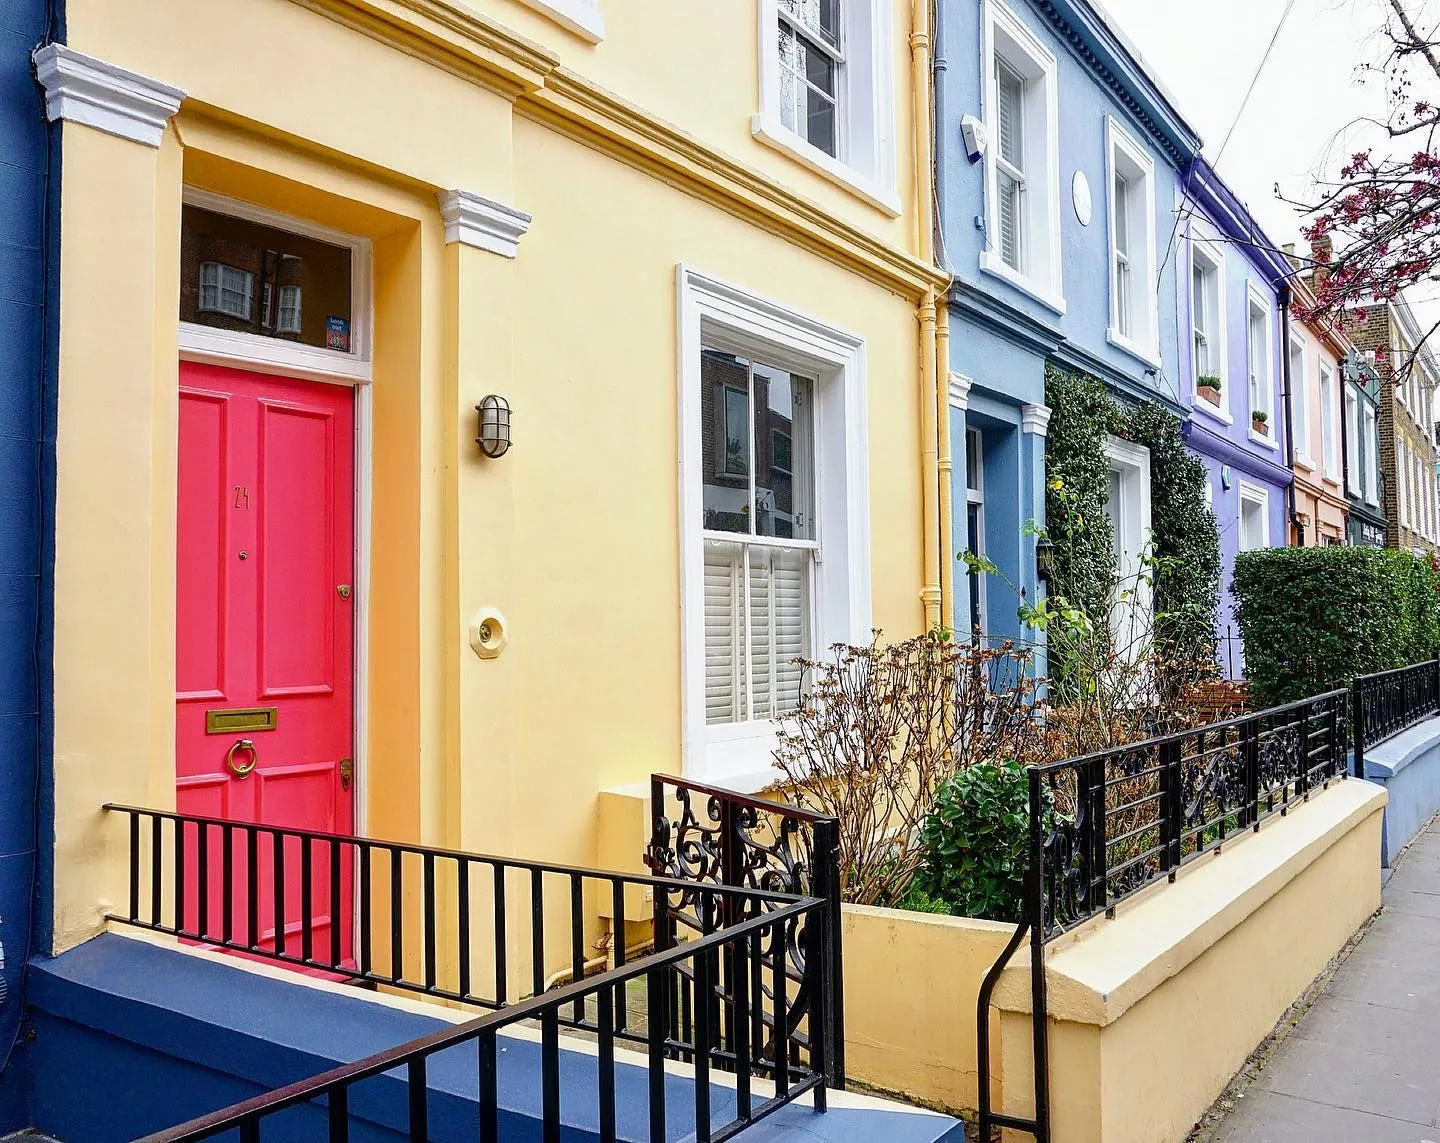 Find some iconic landmarks along the way like Ladbroke Grove Gardens and Notting Hill Summit. Book Notting Hill tour tickets.